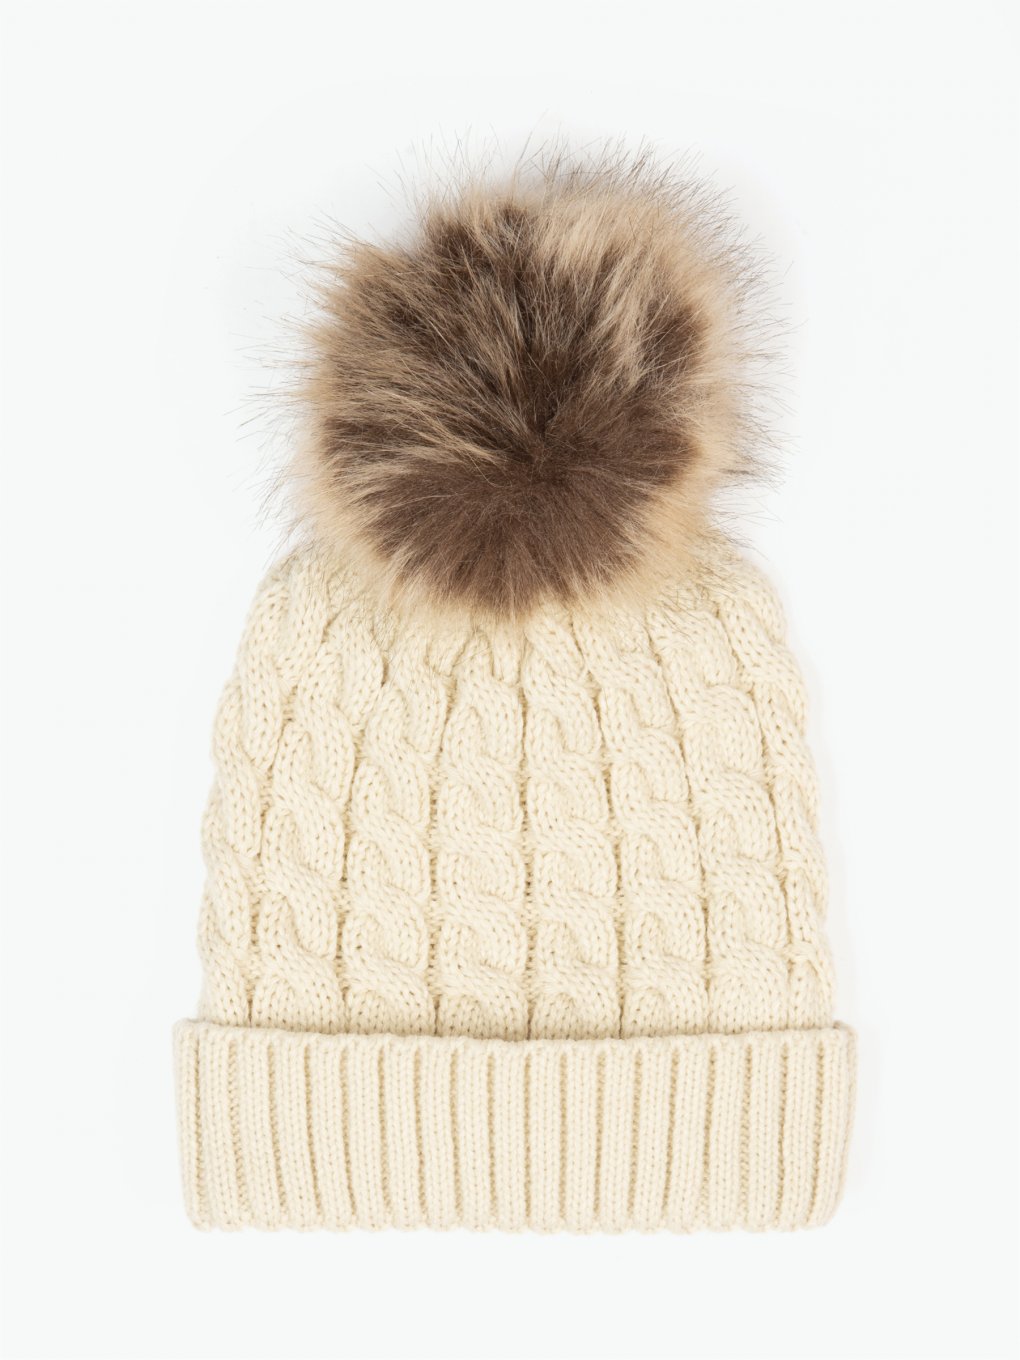 Knitted beanie with faux fur pom